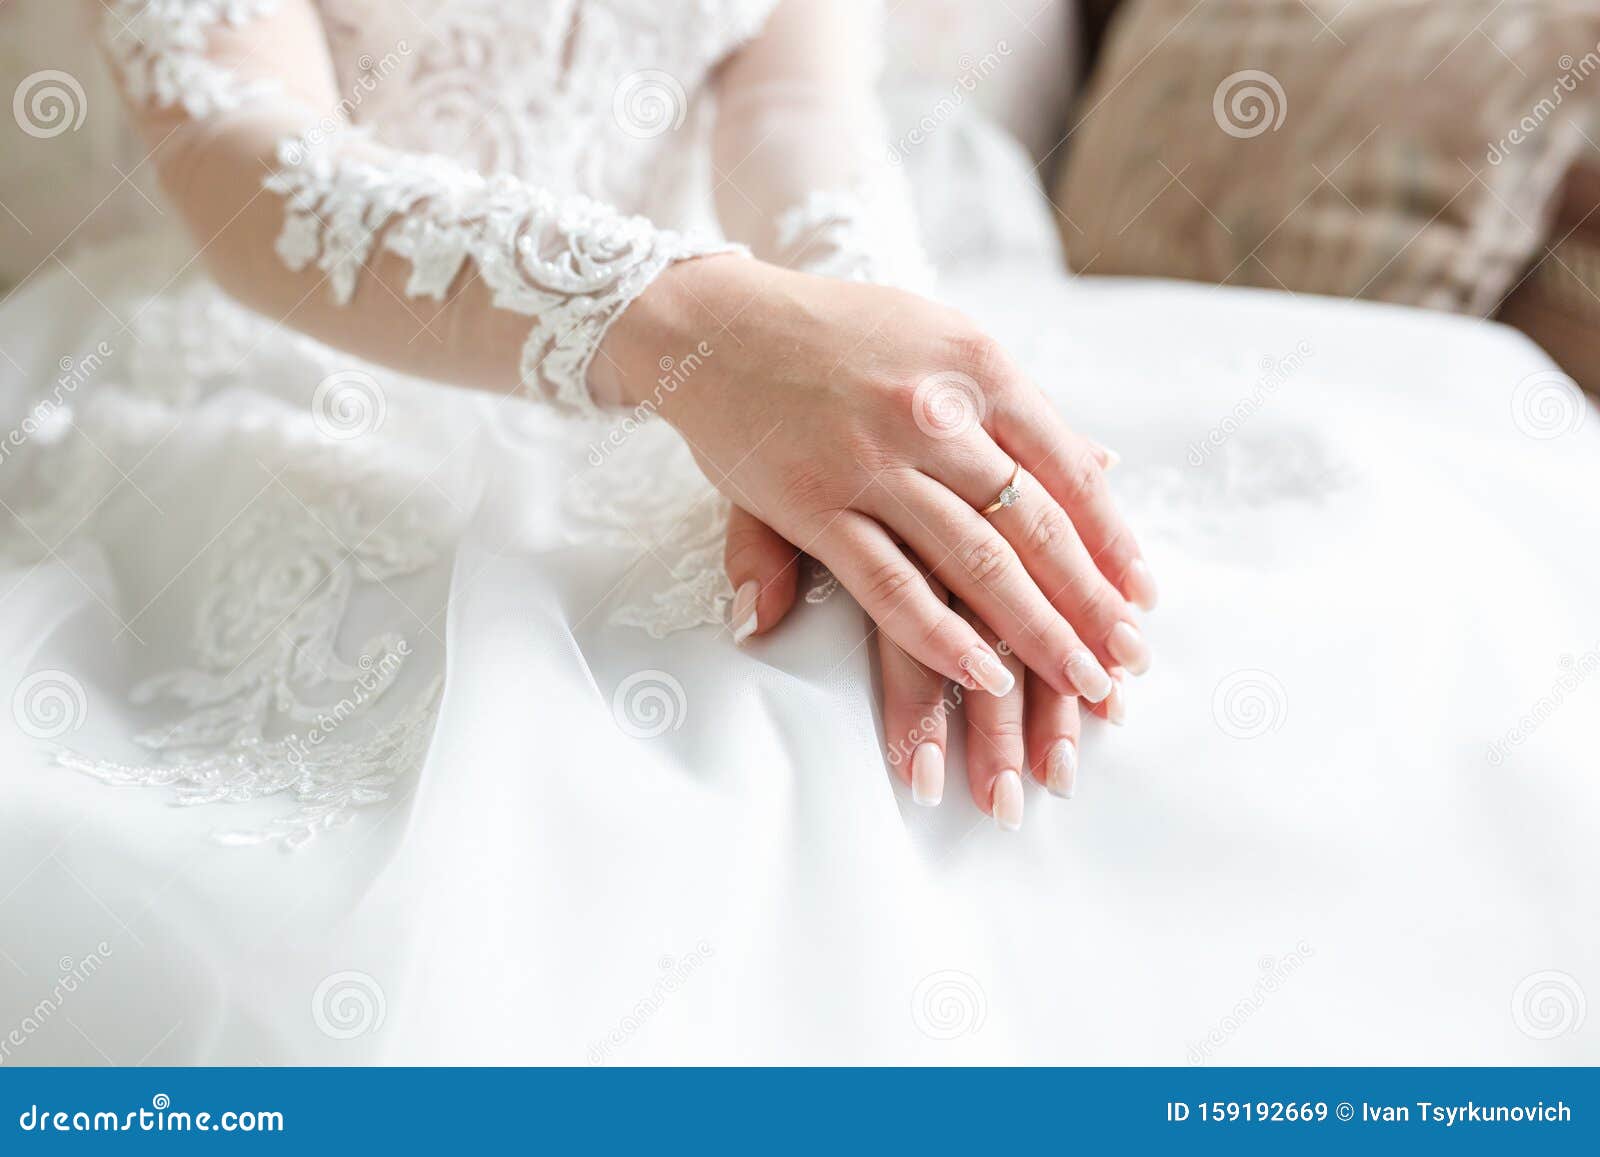 Women`s Hands Folded on Their Knees in Anticipation of the Wedding and ...